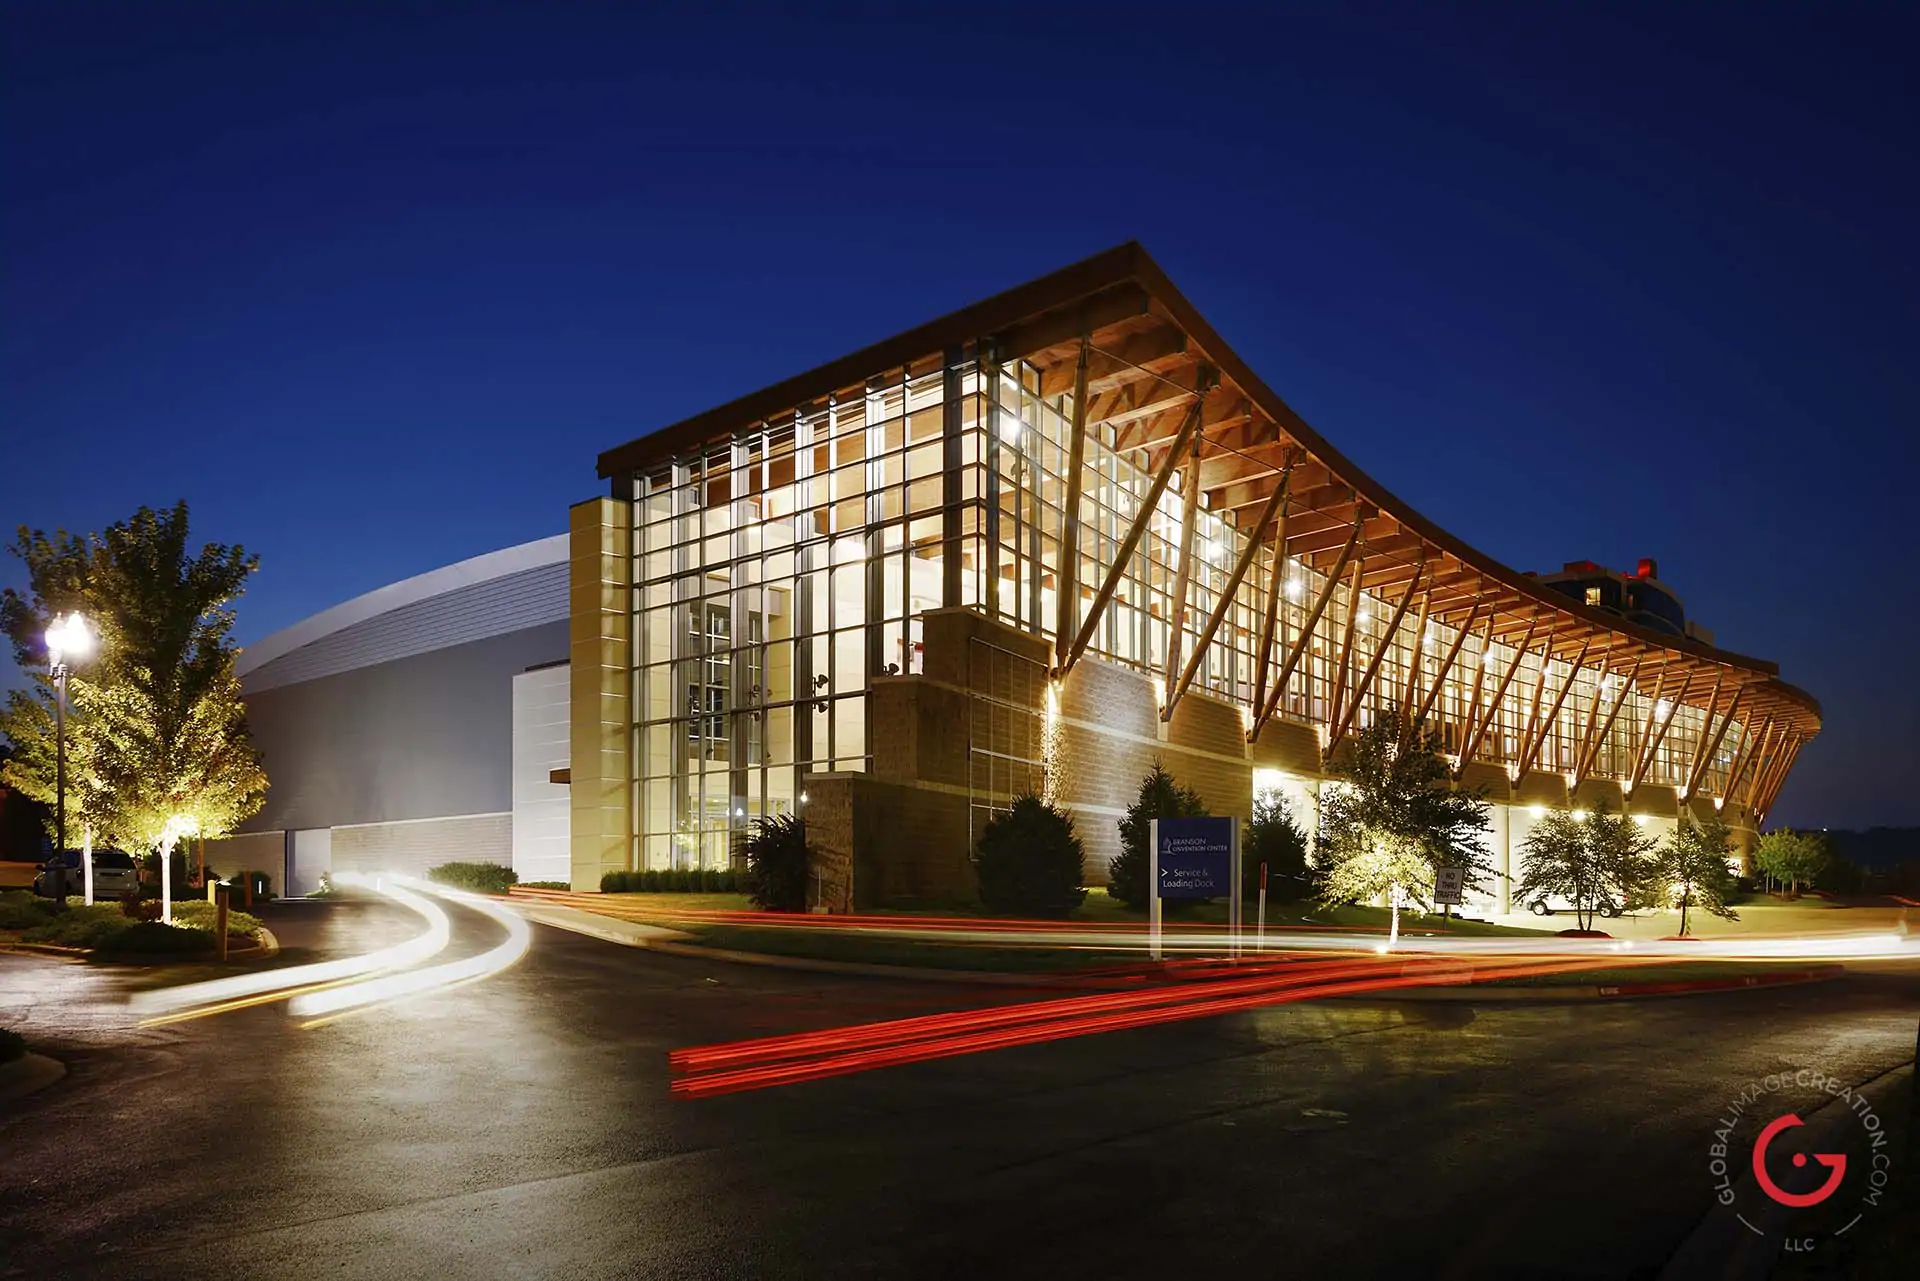 Branson Convention Center night exterior east side in the historic downtown - Professional Architecture Photographer and Commercial Photography of Buildings